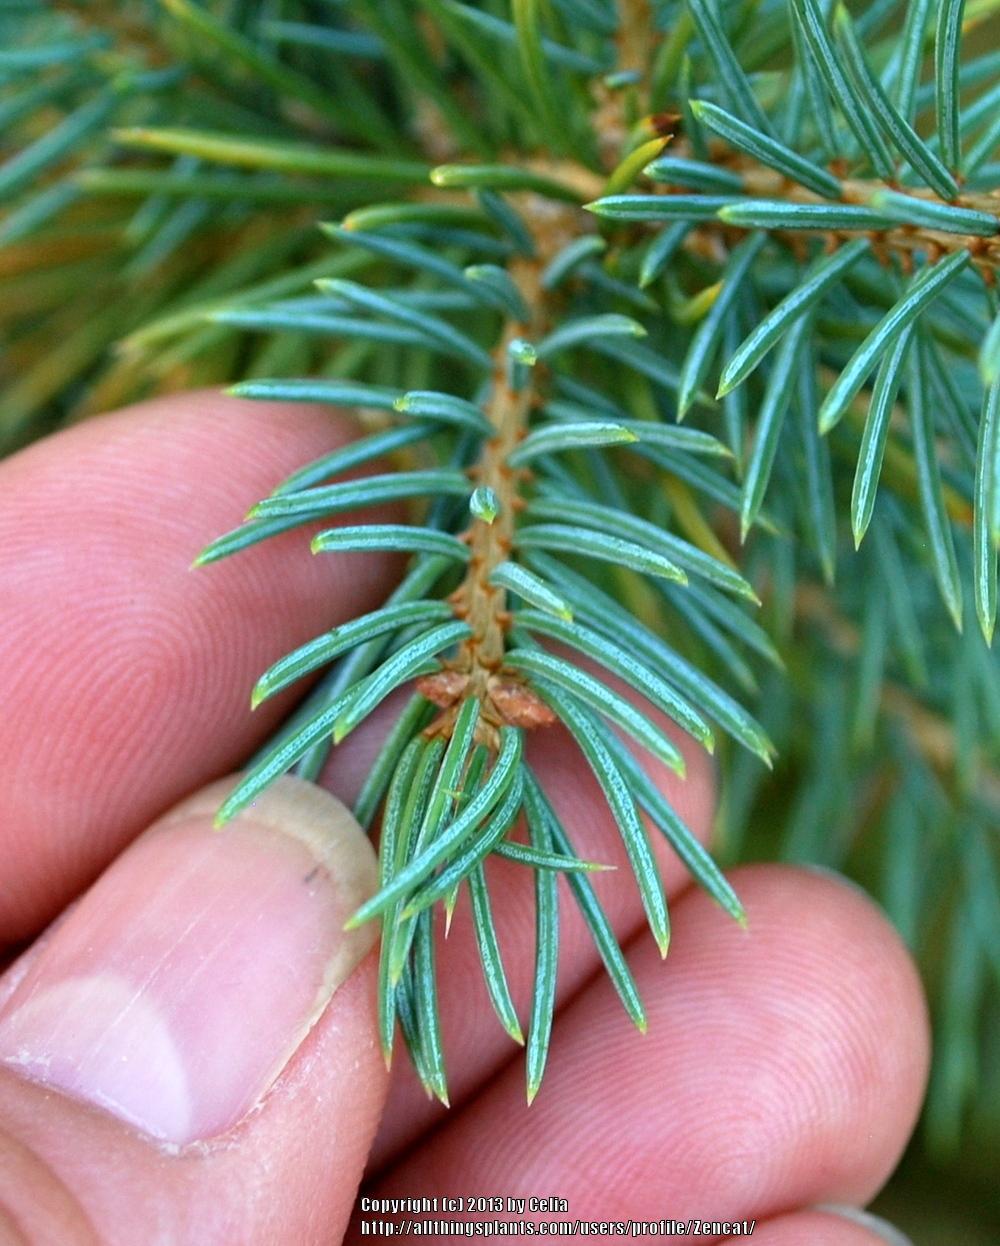 Photo of Colorado Blue Spruce (Picea pungens) uploaded by Zencat